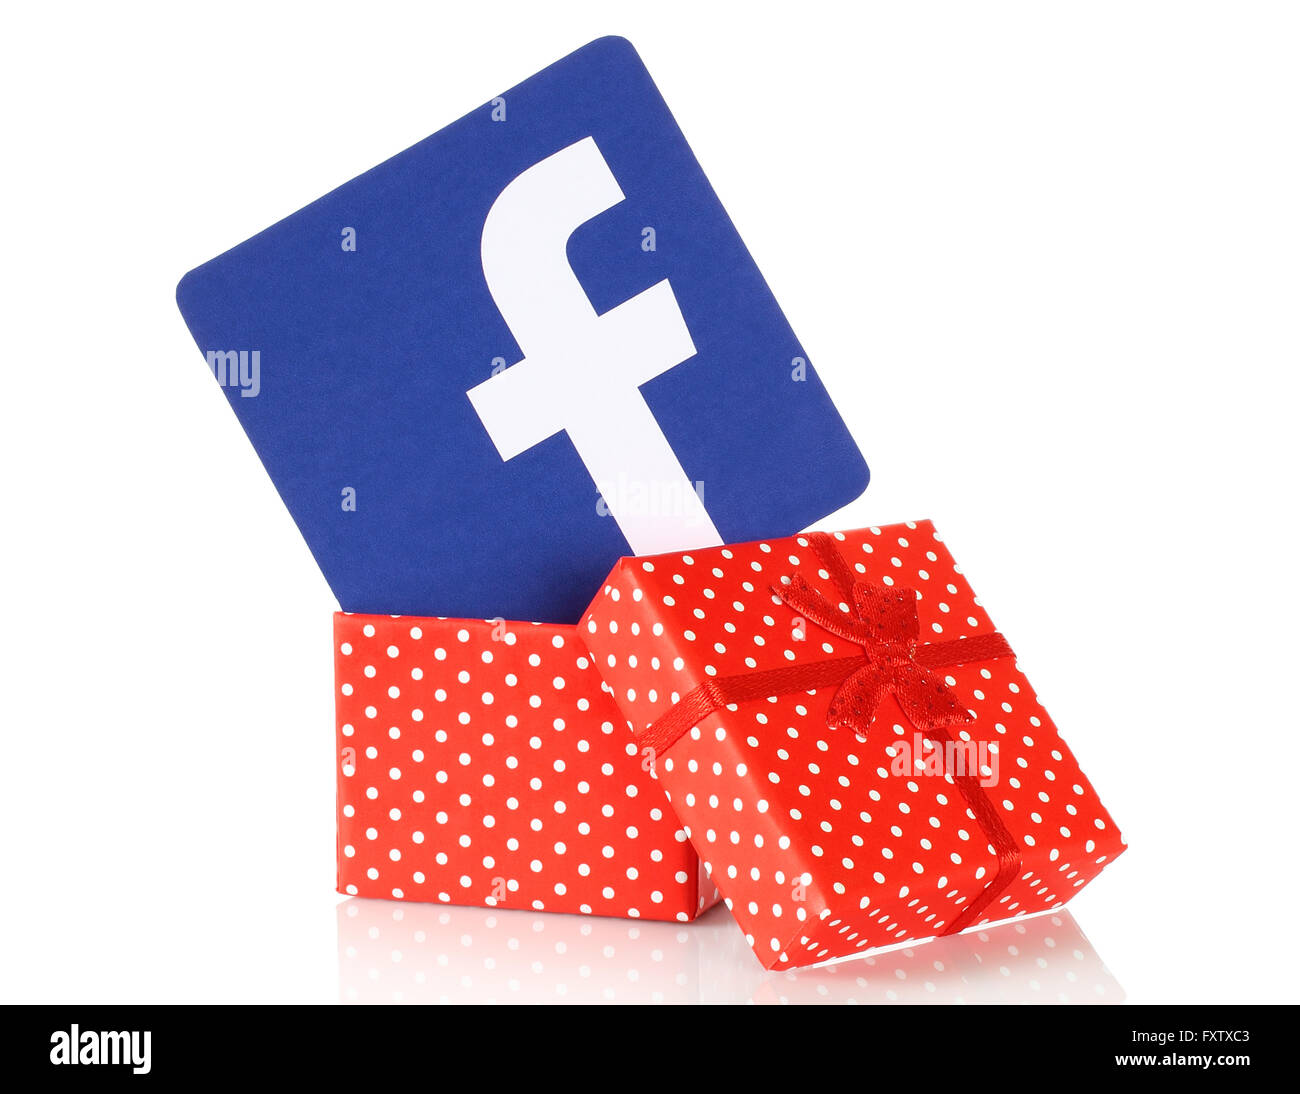 Kiev, Ukraine - January 11, 2016: Facebook logo printed on paper and put into present box on white background. Facebook is a wel Stock Photo